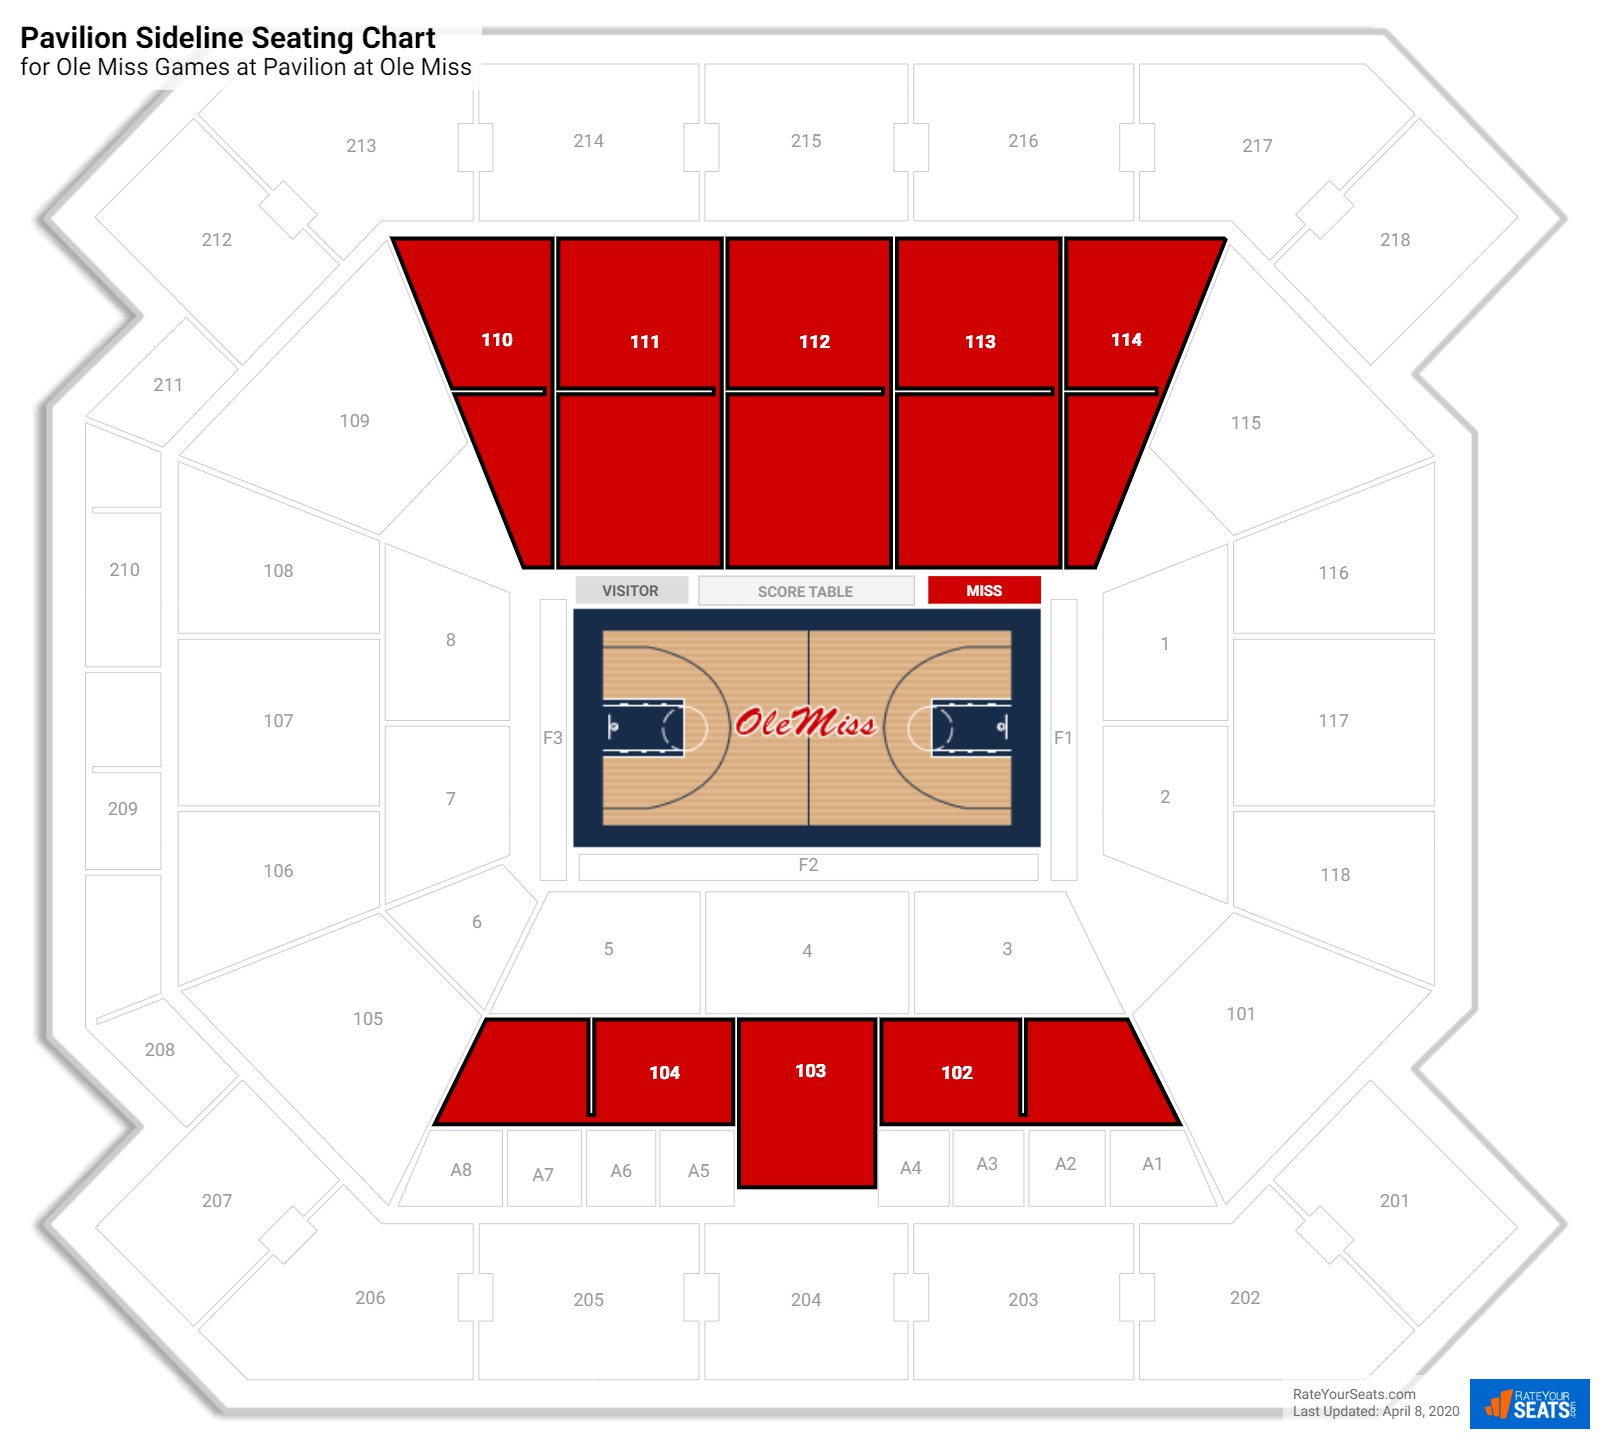 Pavilion at Ole Miss (Ole Miss) Seating Guide ...